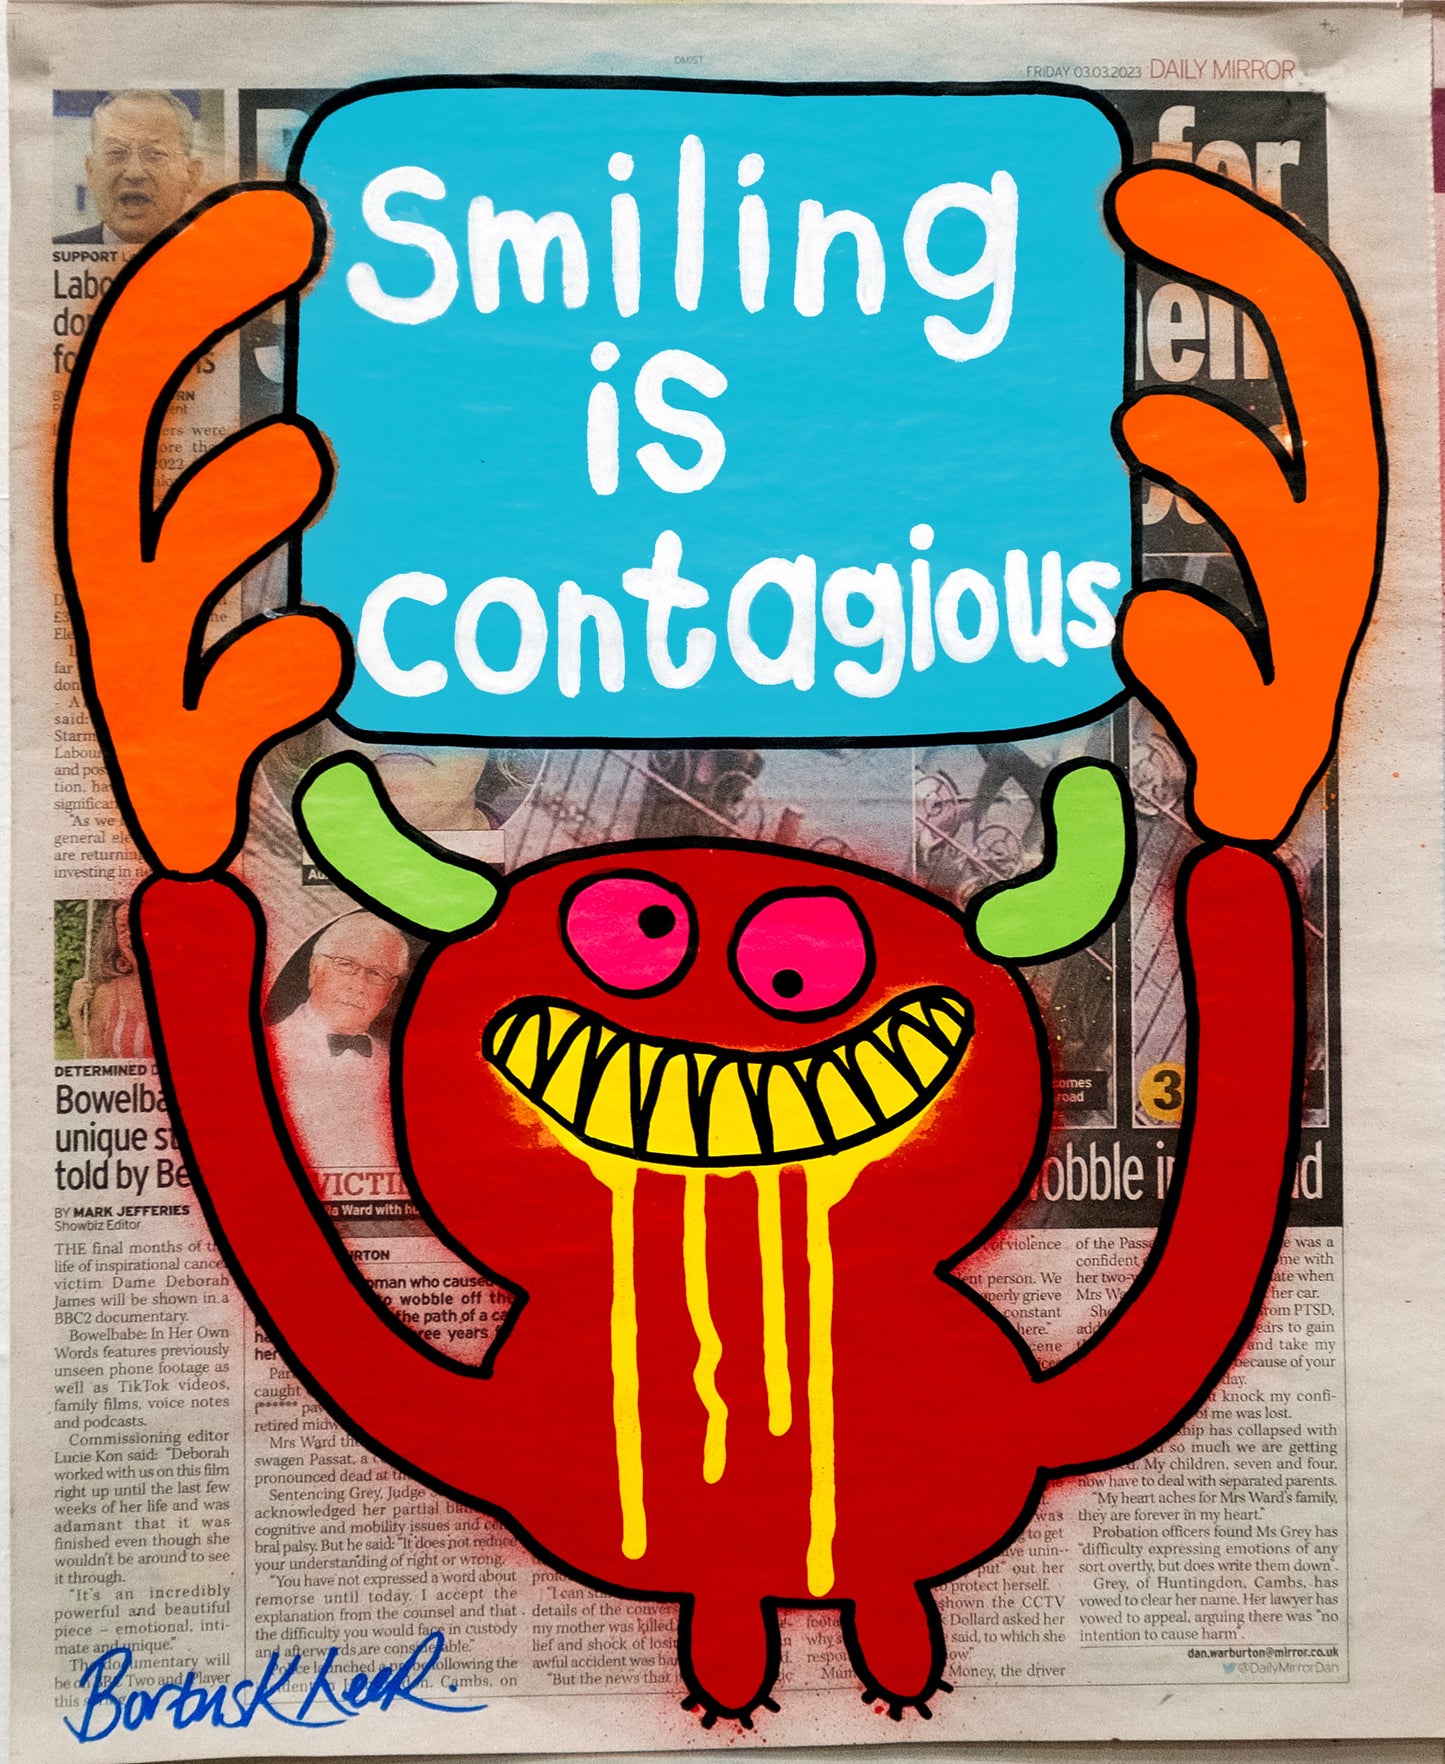 Smiling is contagious by Bortusk Leer